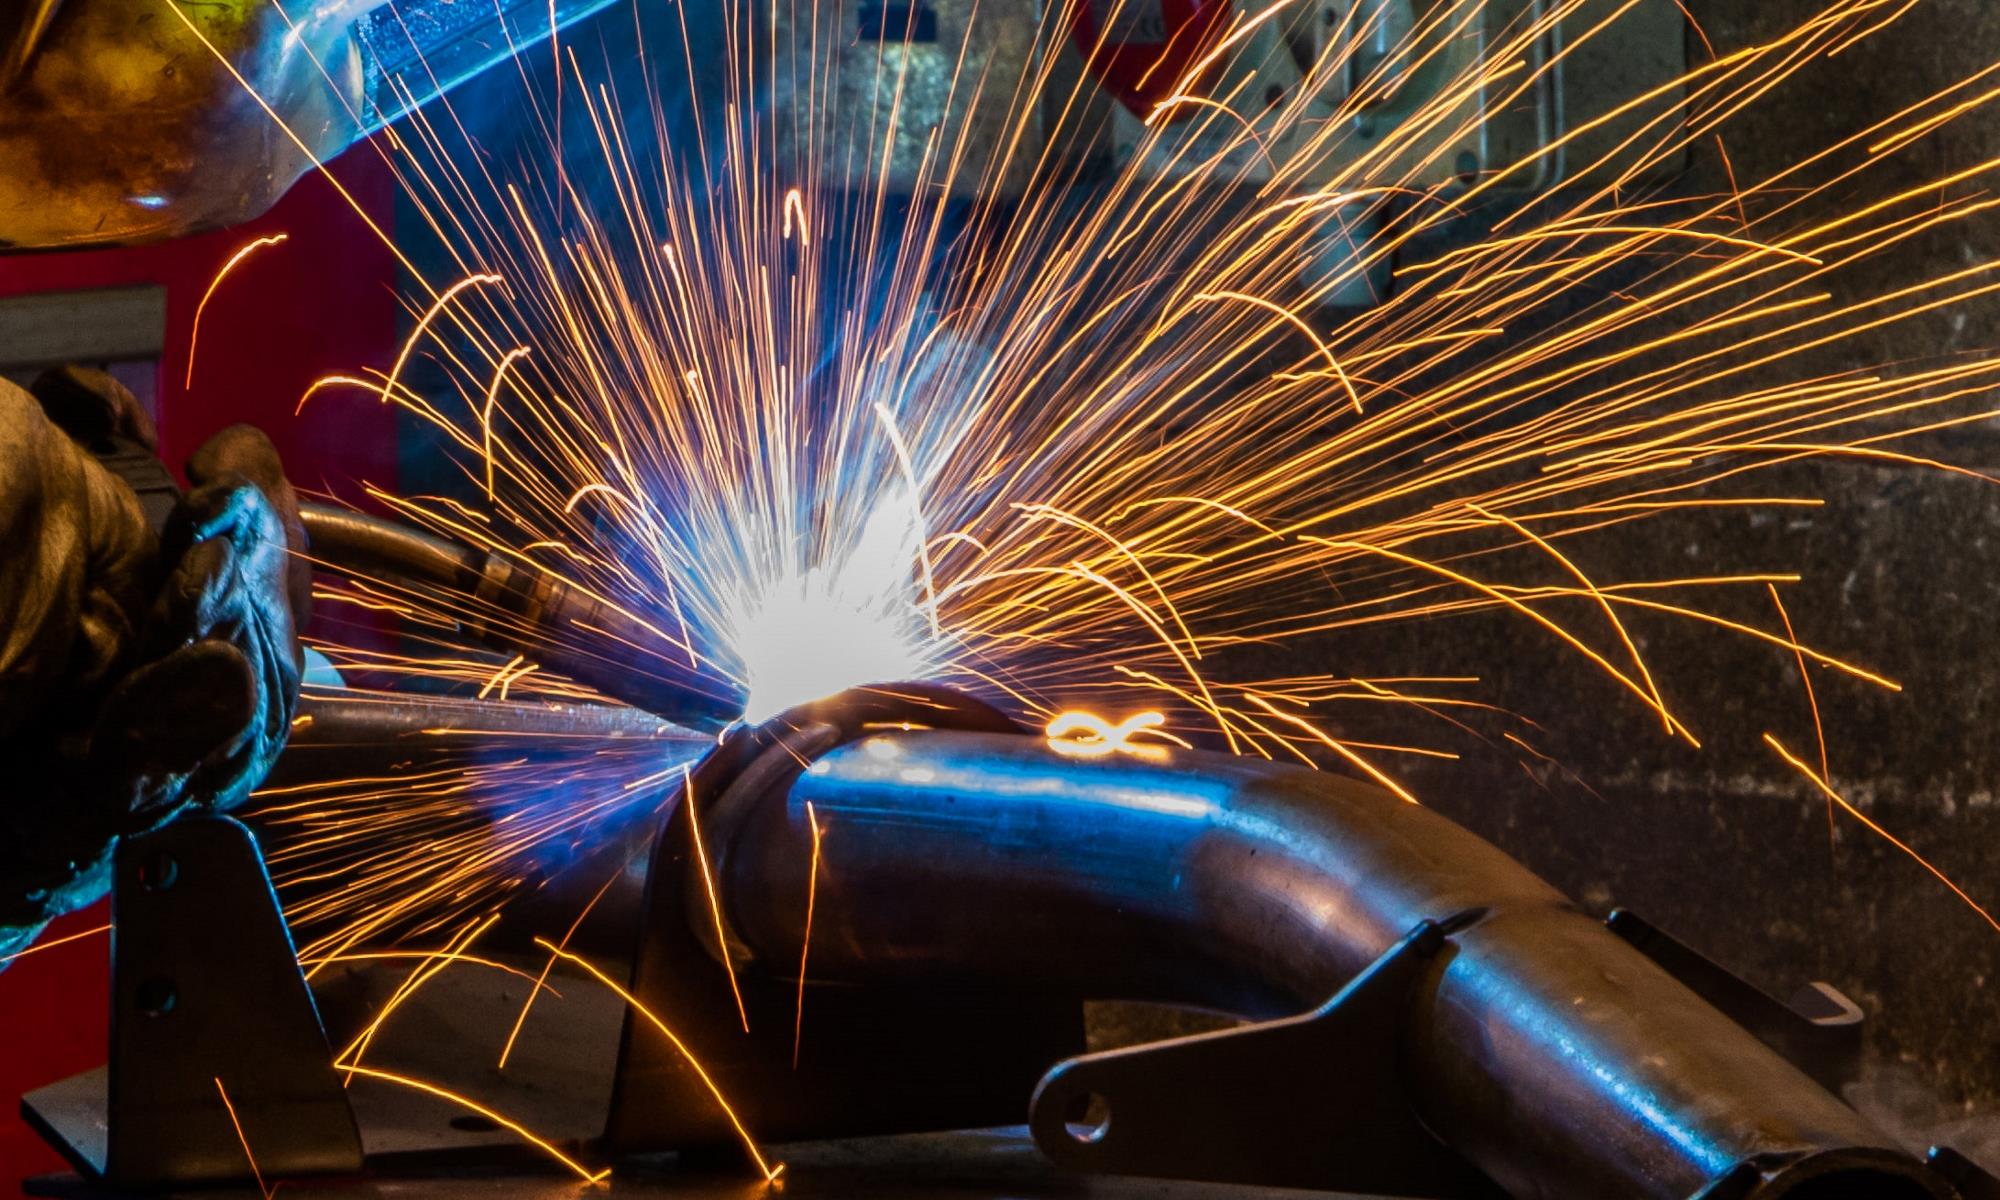 Our skilled and qualified workforce, use our own precision jigs which enable us to produce high quality components efficiently. 
We have coded welders and can work in both MIG and TIG welding for any batch requirements.